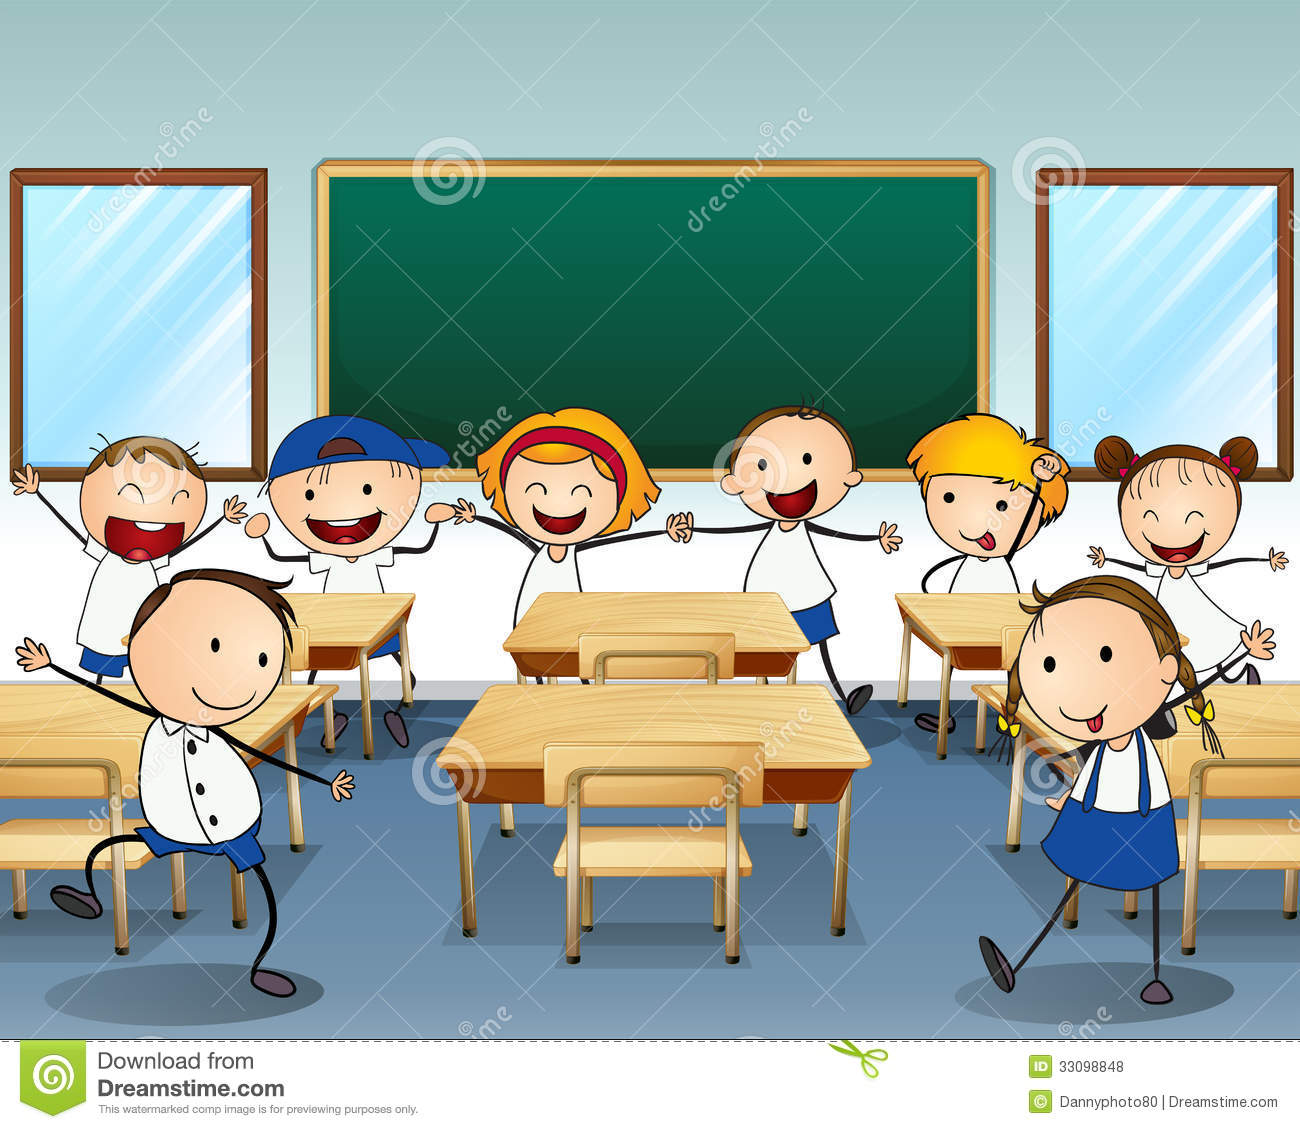 Children Dancing Inside The Classroom Royalty Free Stock Photos